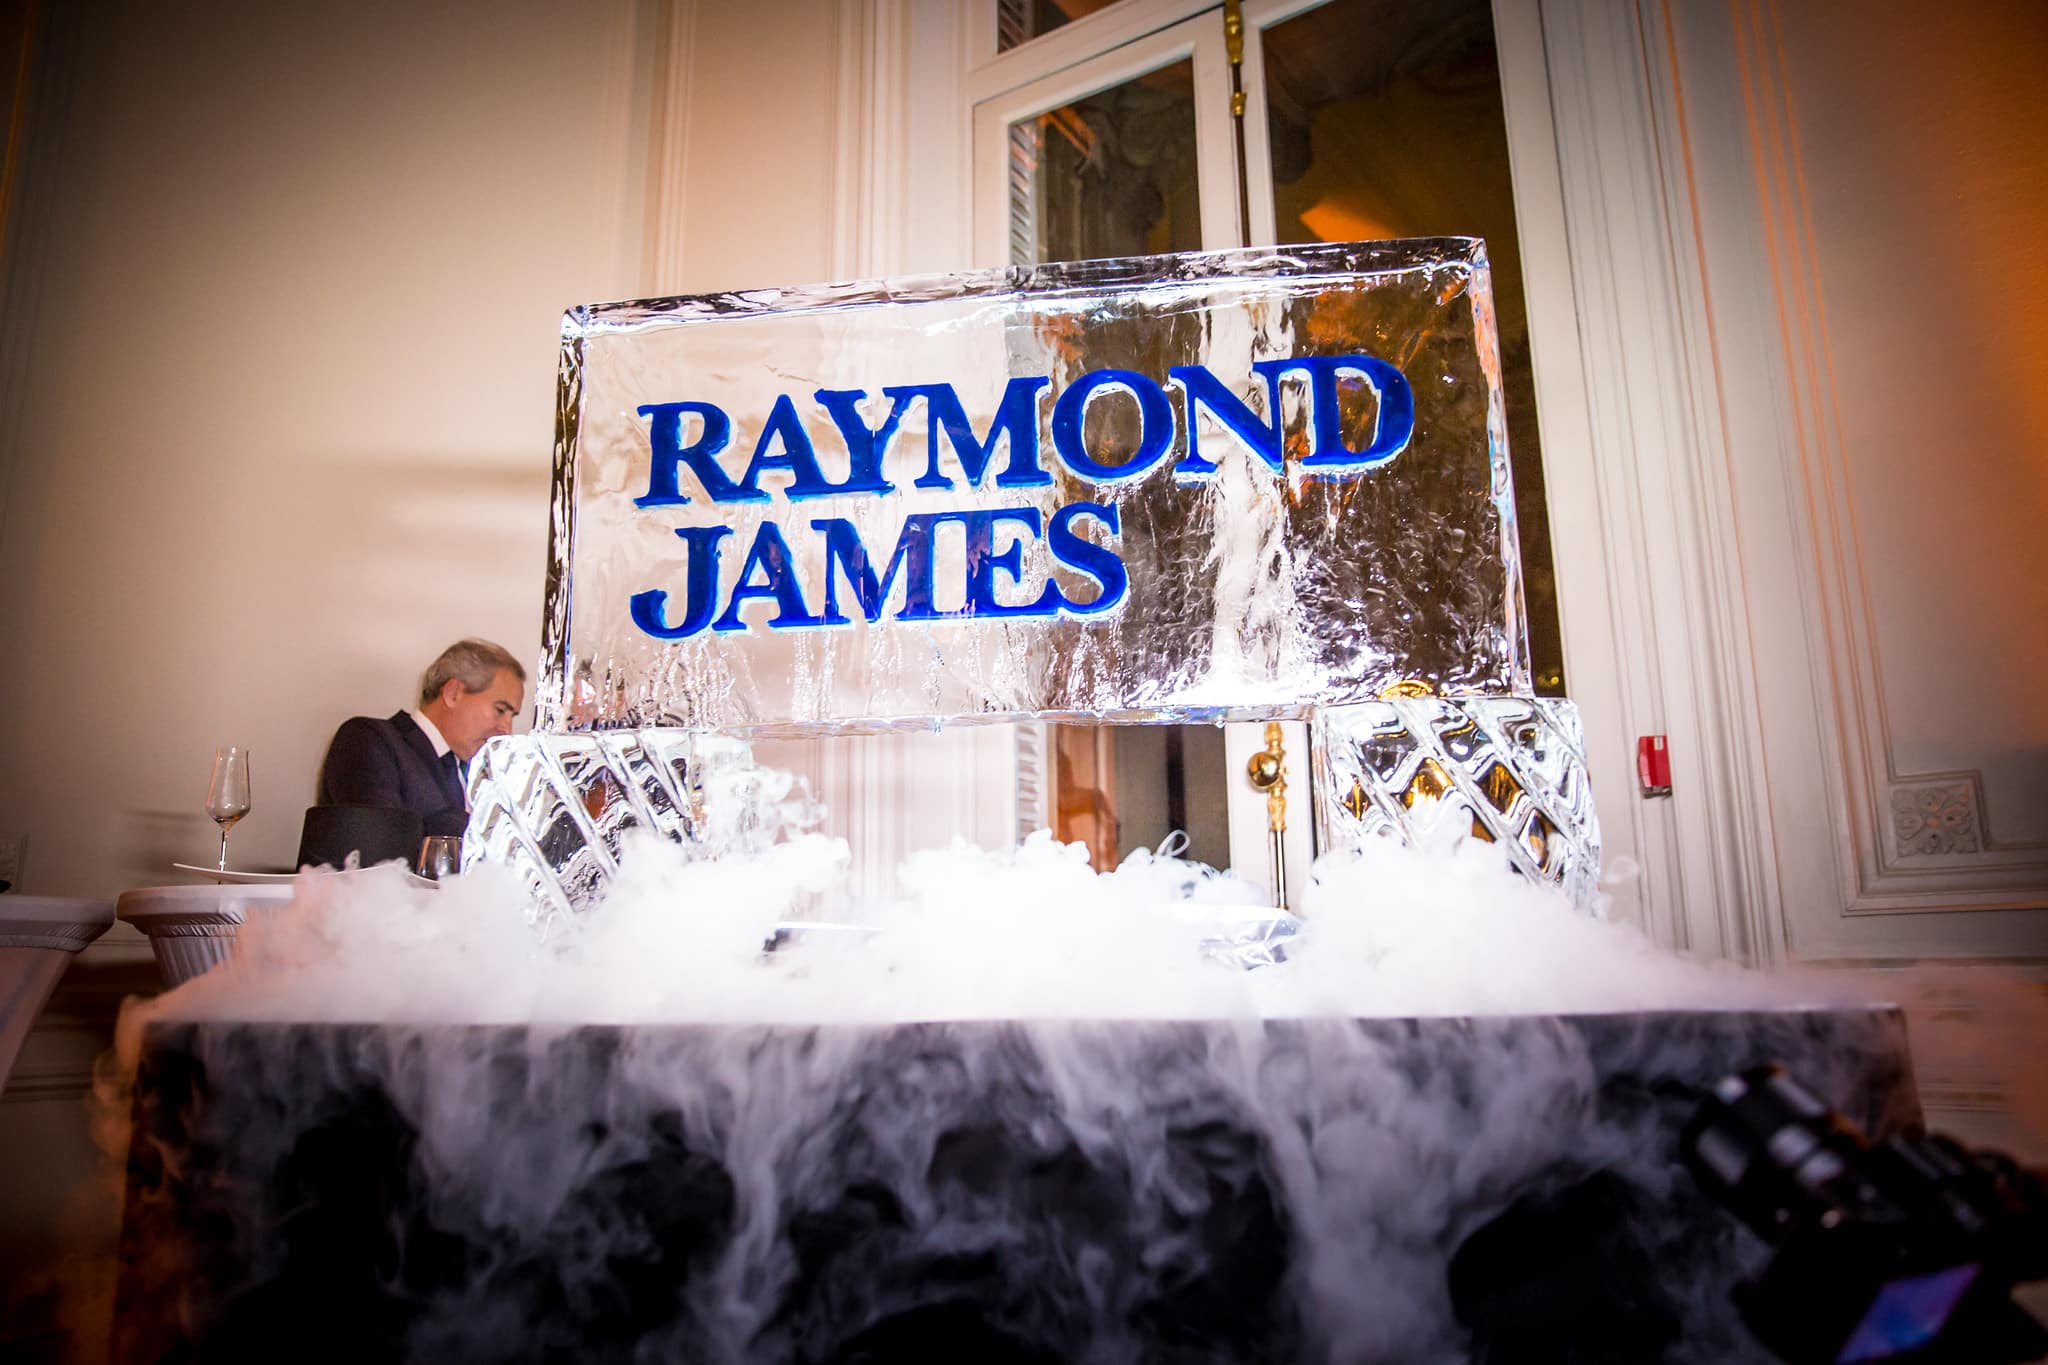 logo-raymond-james-glace-fumee-evenement-sur-mesure-soiree-spectaculaire-hotel-particulier-19-arrondissement-wall-street-Raymond-James-agence-wato-we-are-the-oracle-evenementiel-event